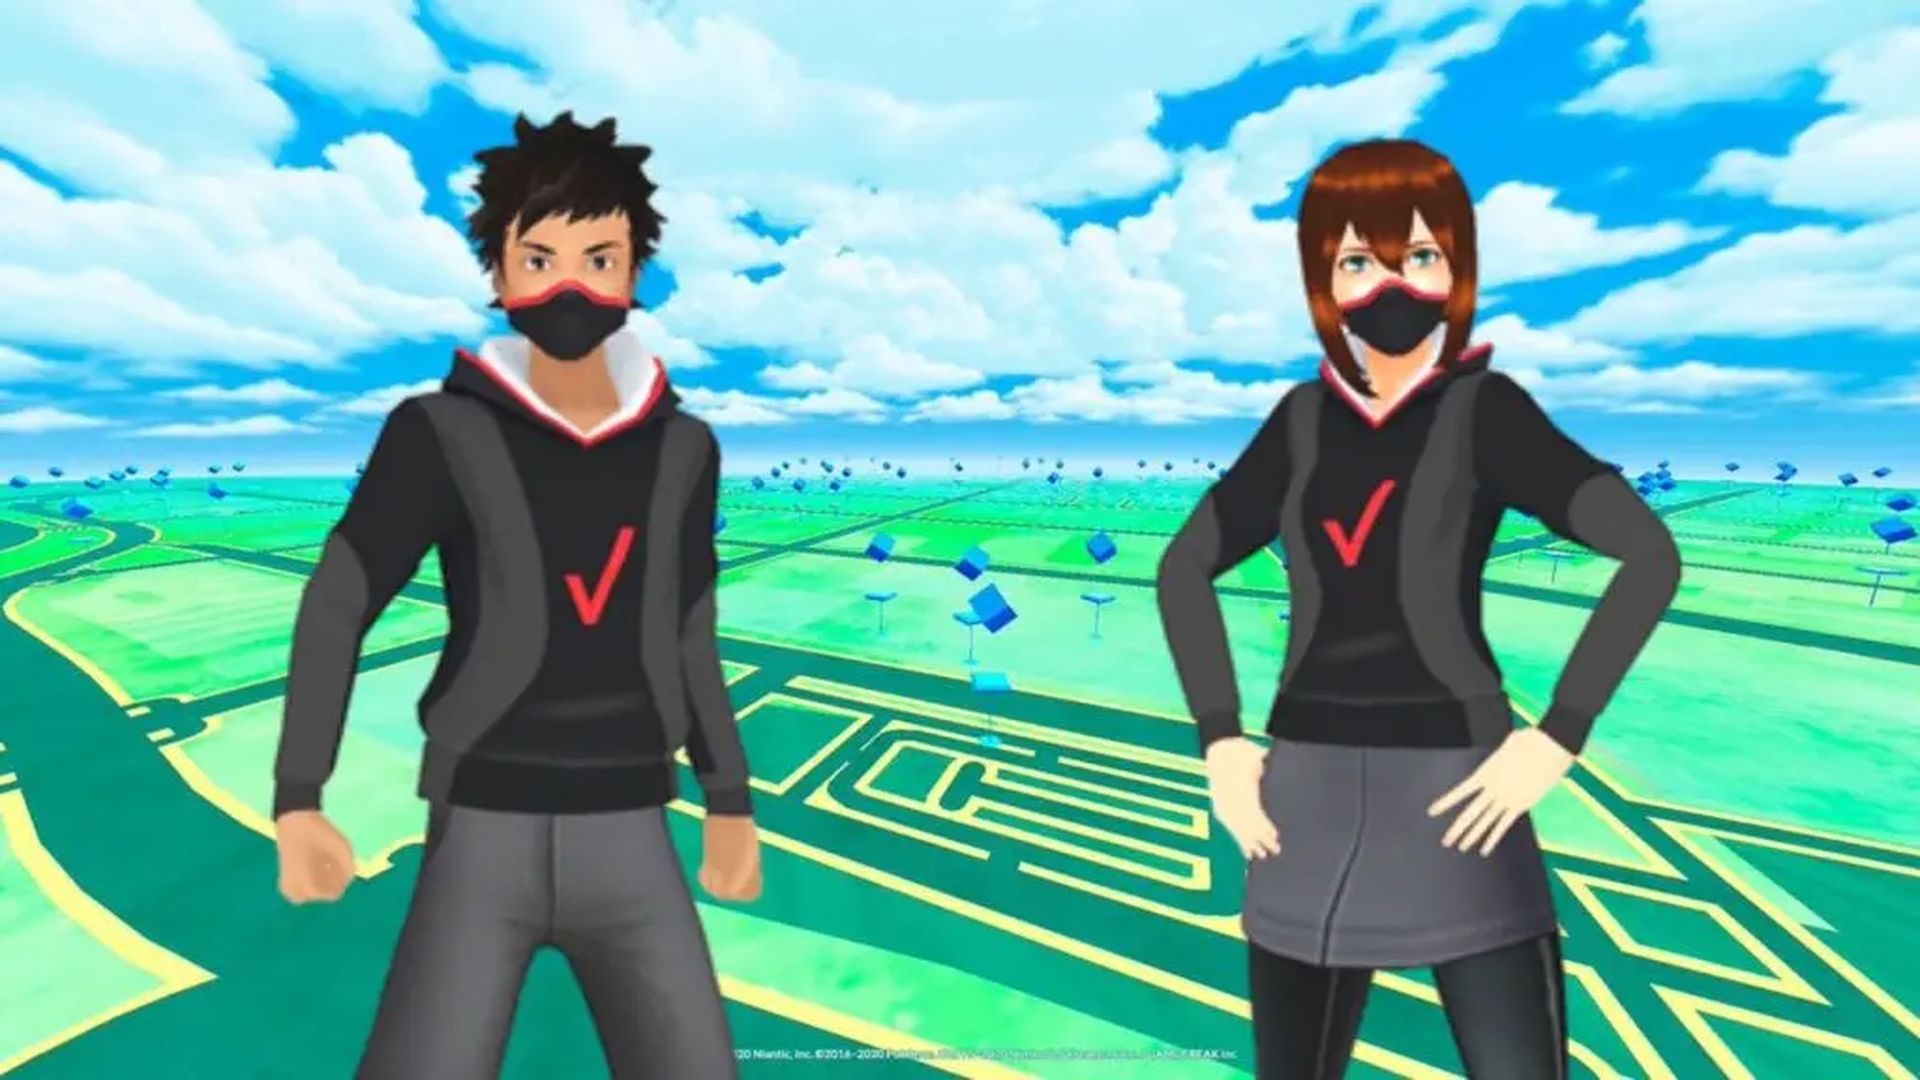 Today, we'll be going over the Verizon Pokemon GO code and how to redeem it, so you can enjoy these free cosmetics and show them off to other trainers.